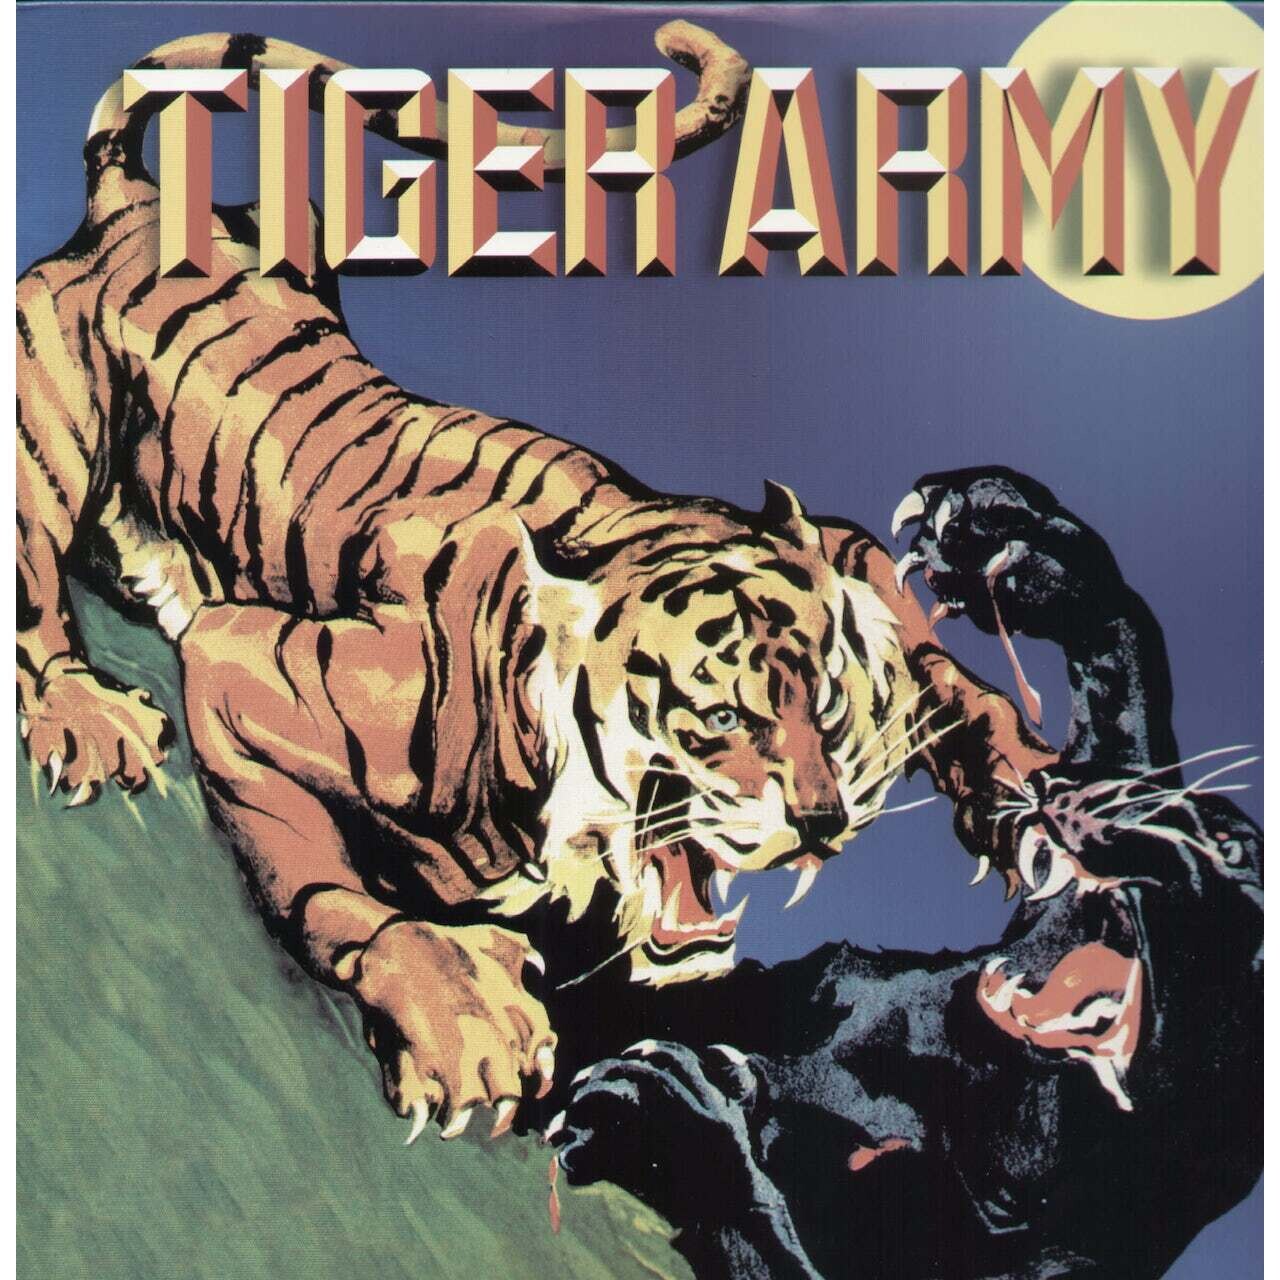 Tiger Army / Self Titled